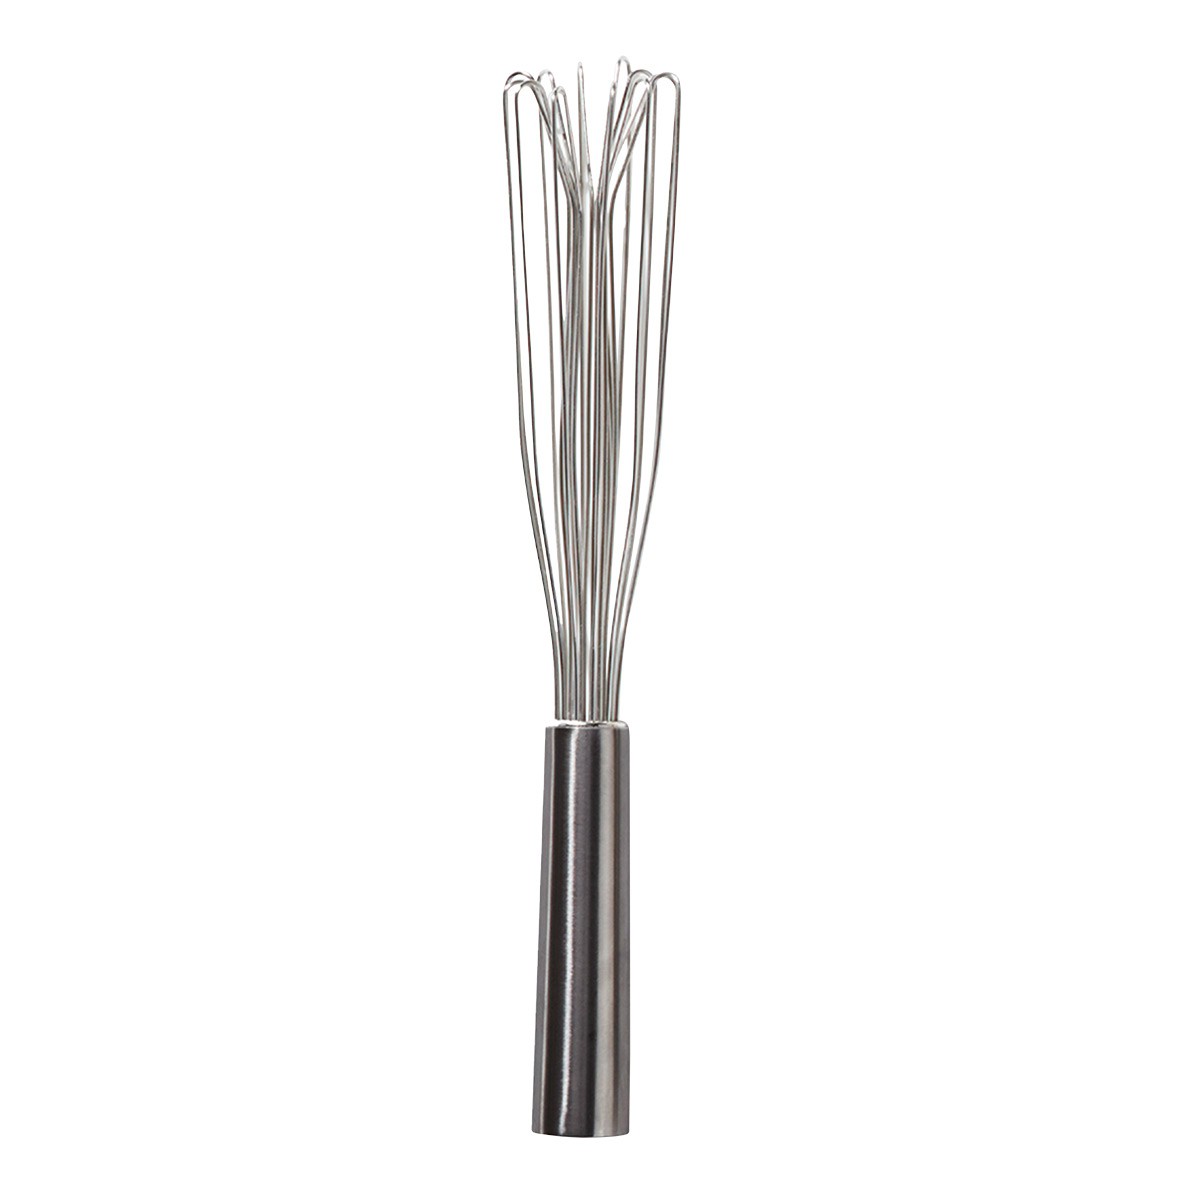 https://www.containerstore.com/catalogimages/486814/10094896---Air-Whisk_white-backgroun.jpg